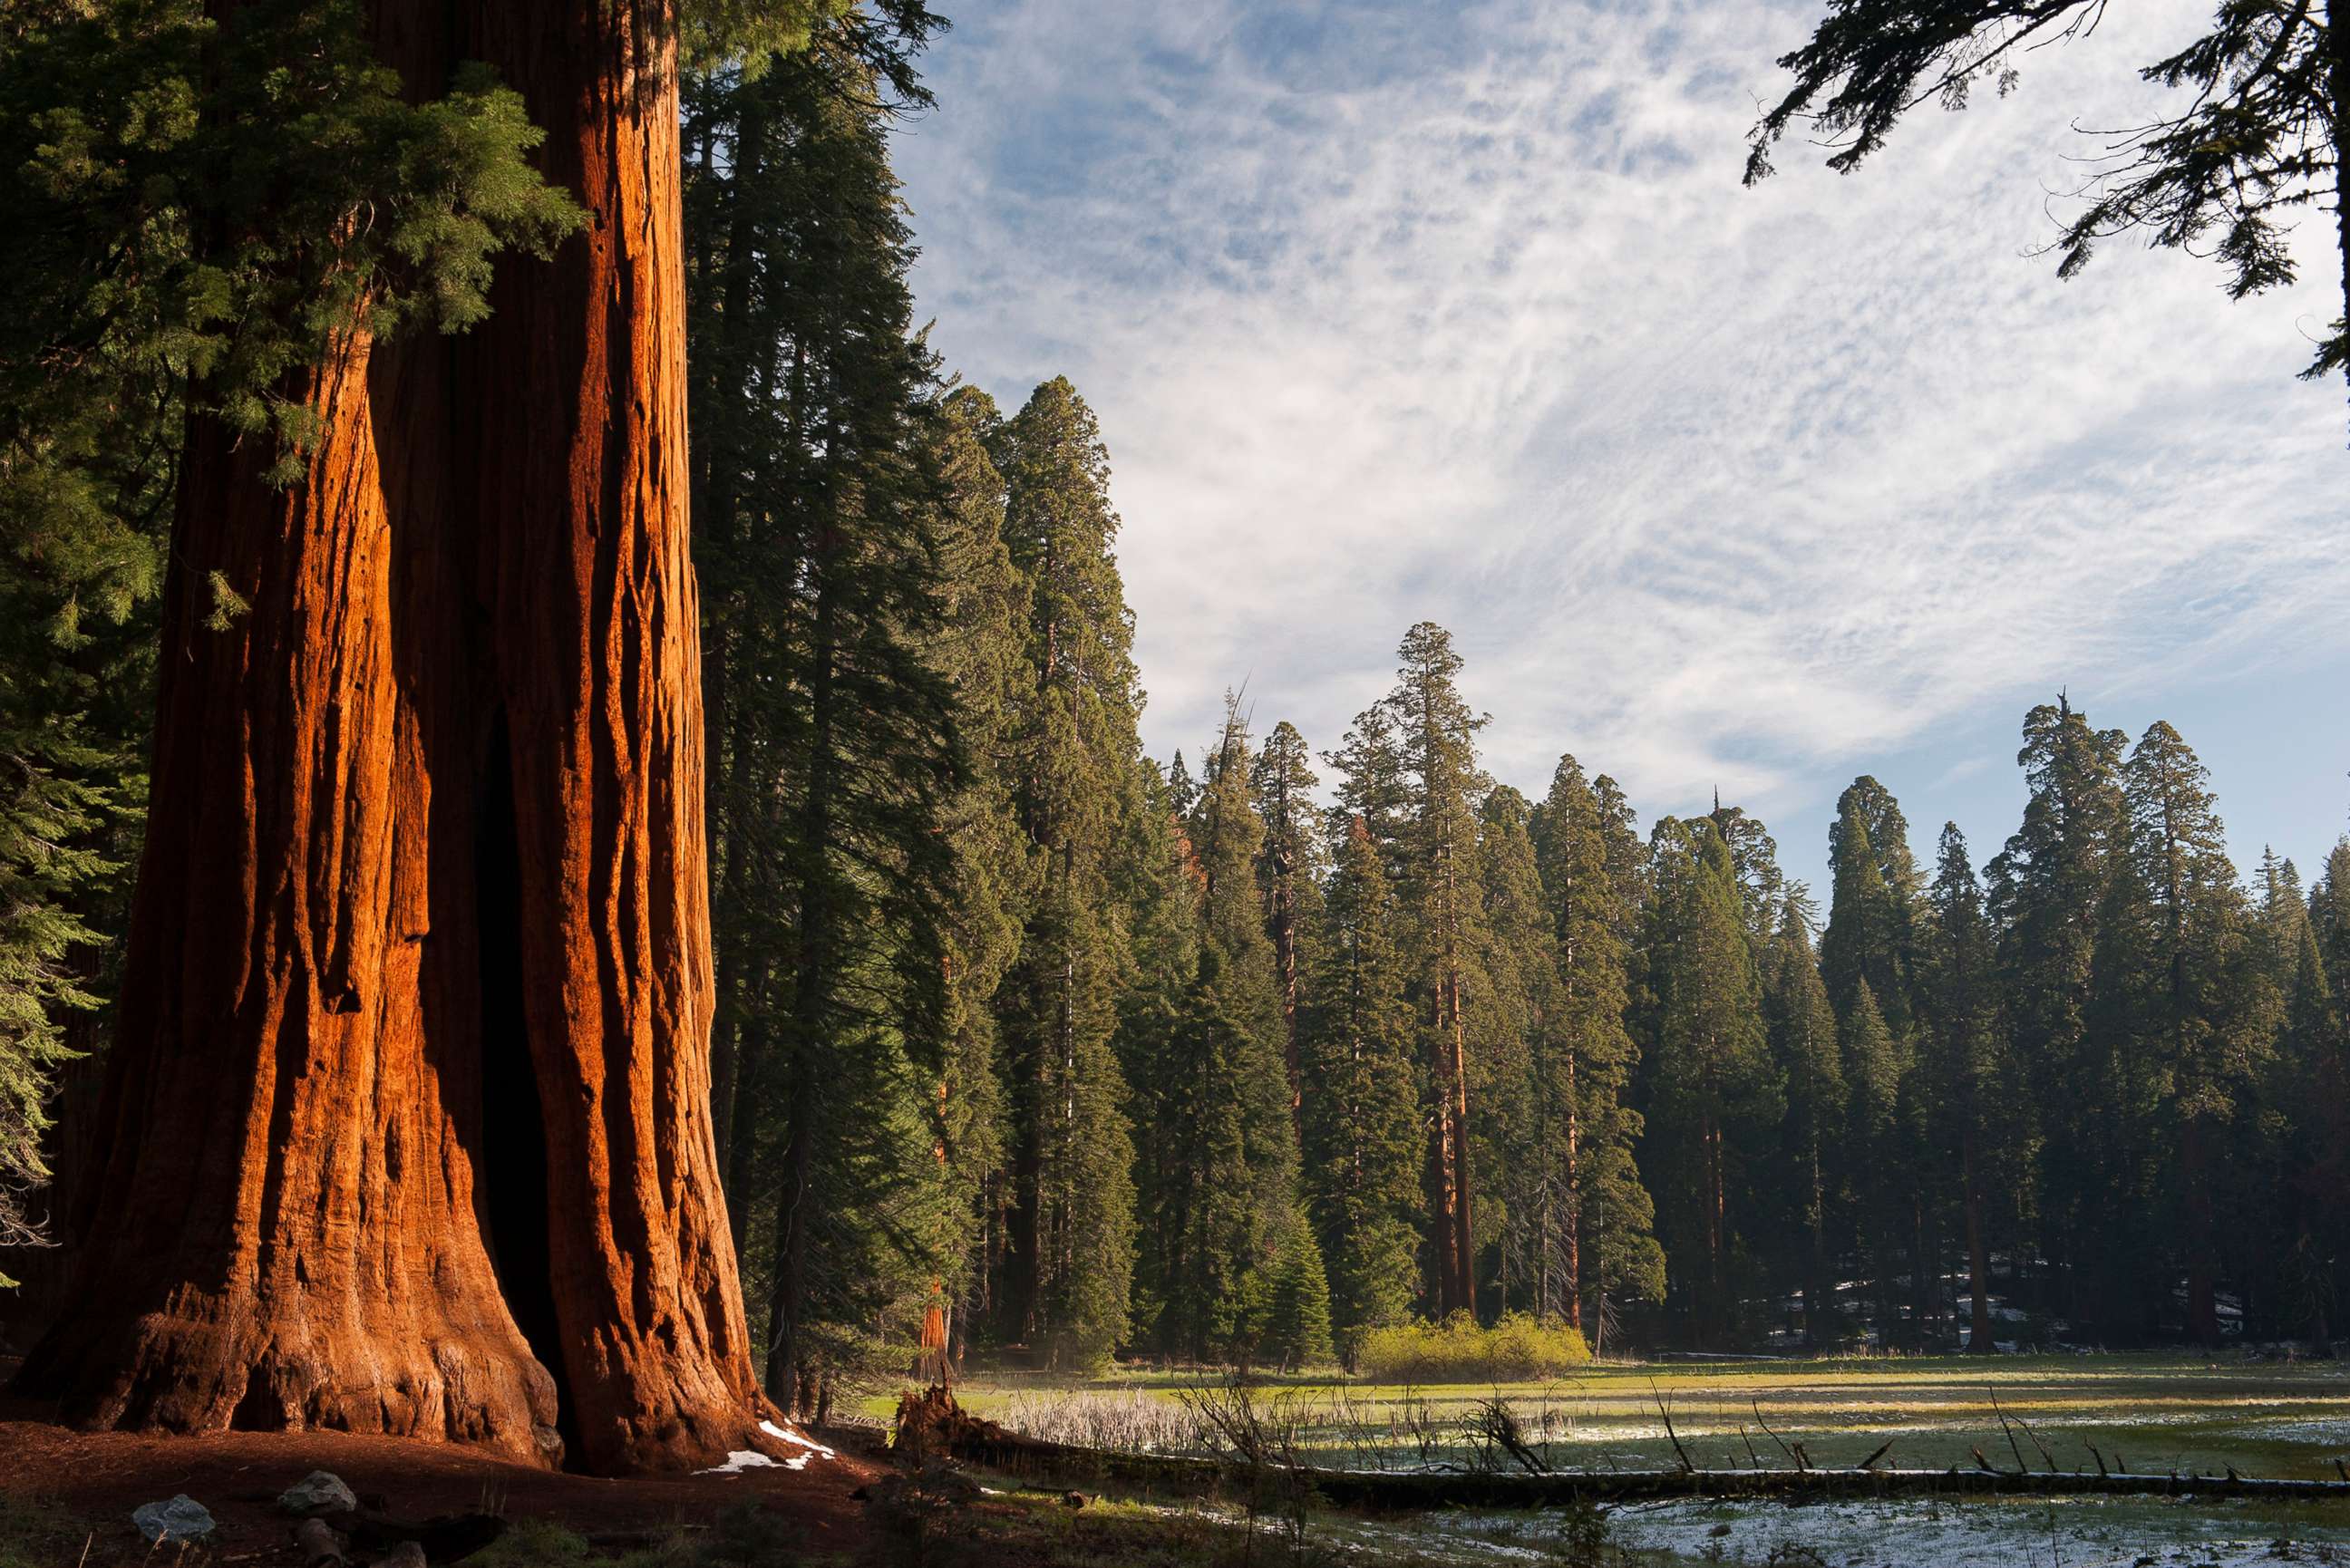 PHOTO: In this undated file photo, Sequoia trees are shown in Sequoia National Park in California.